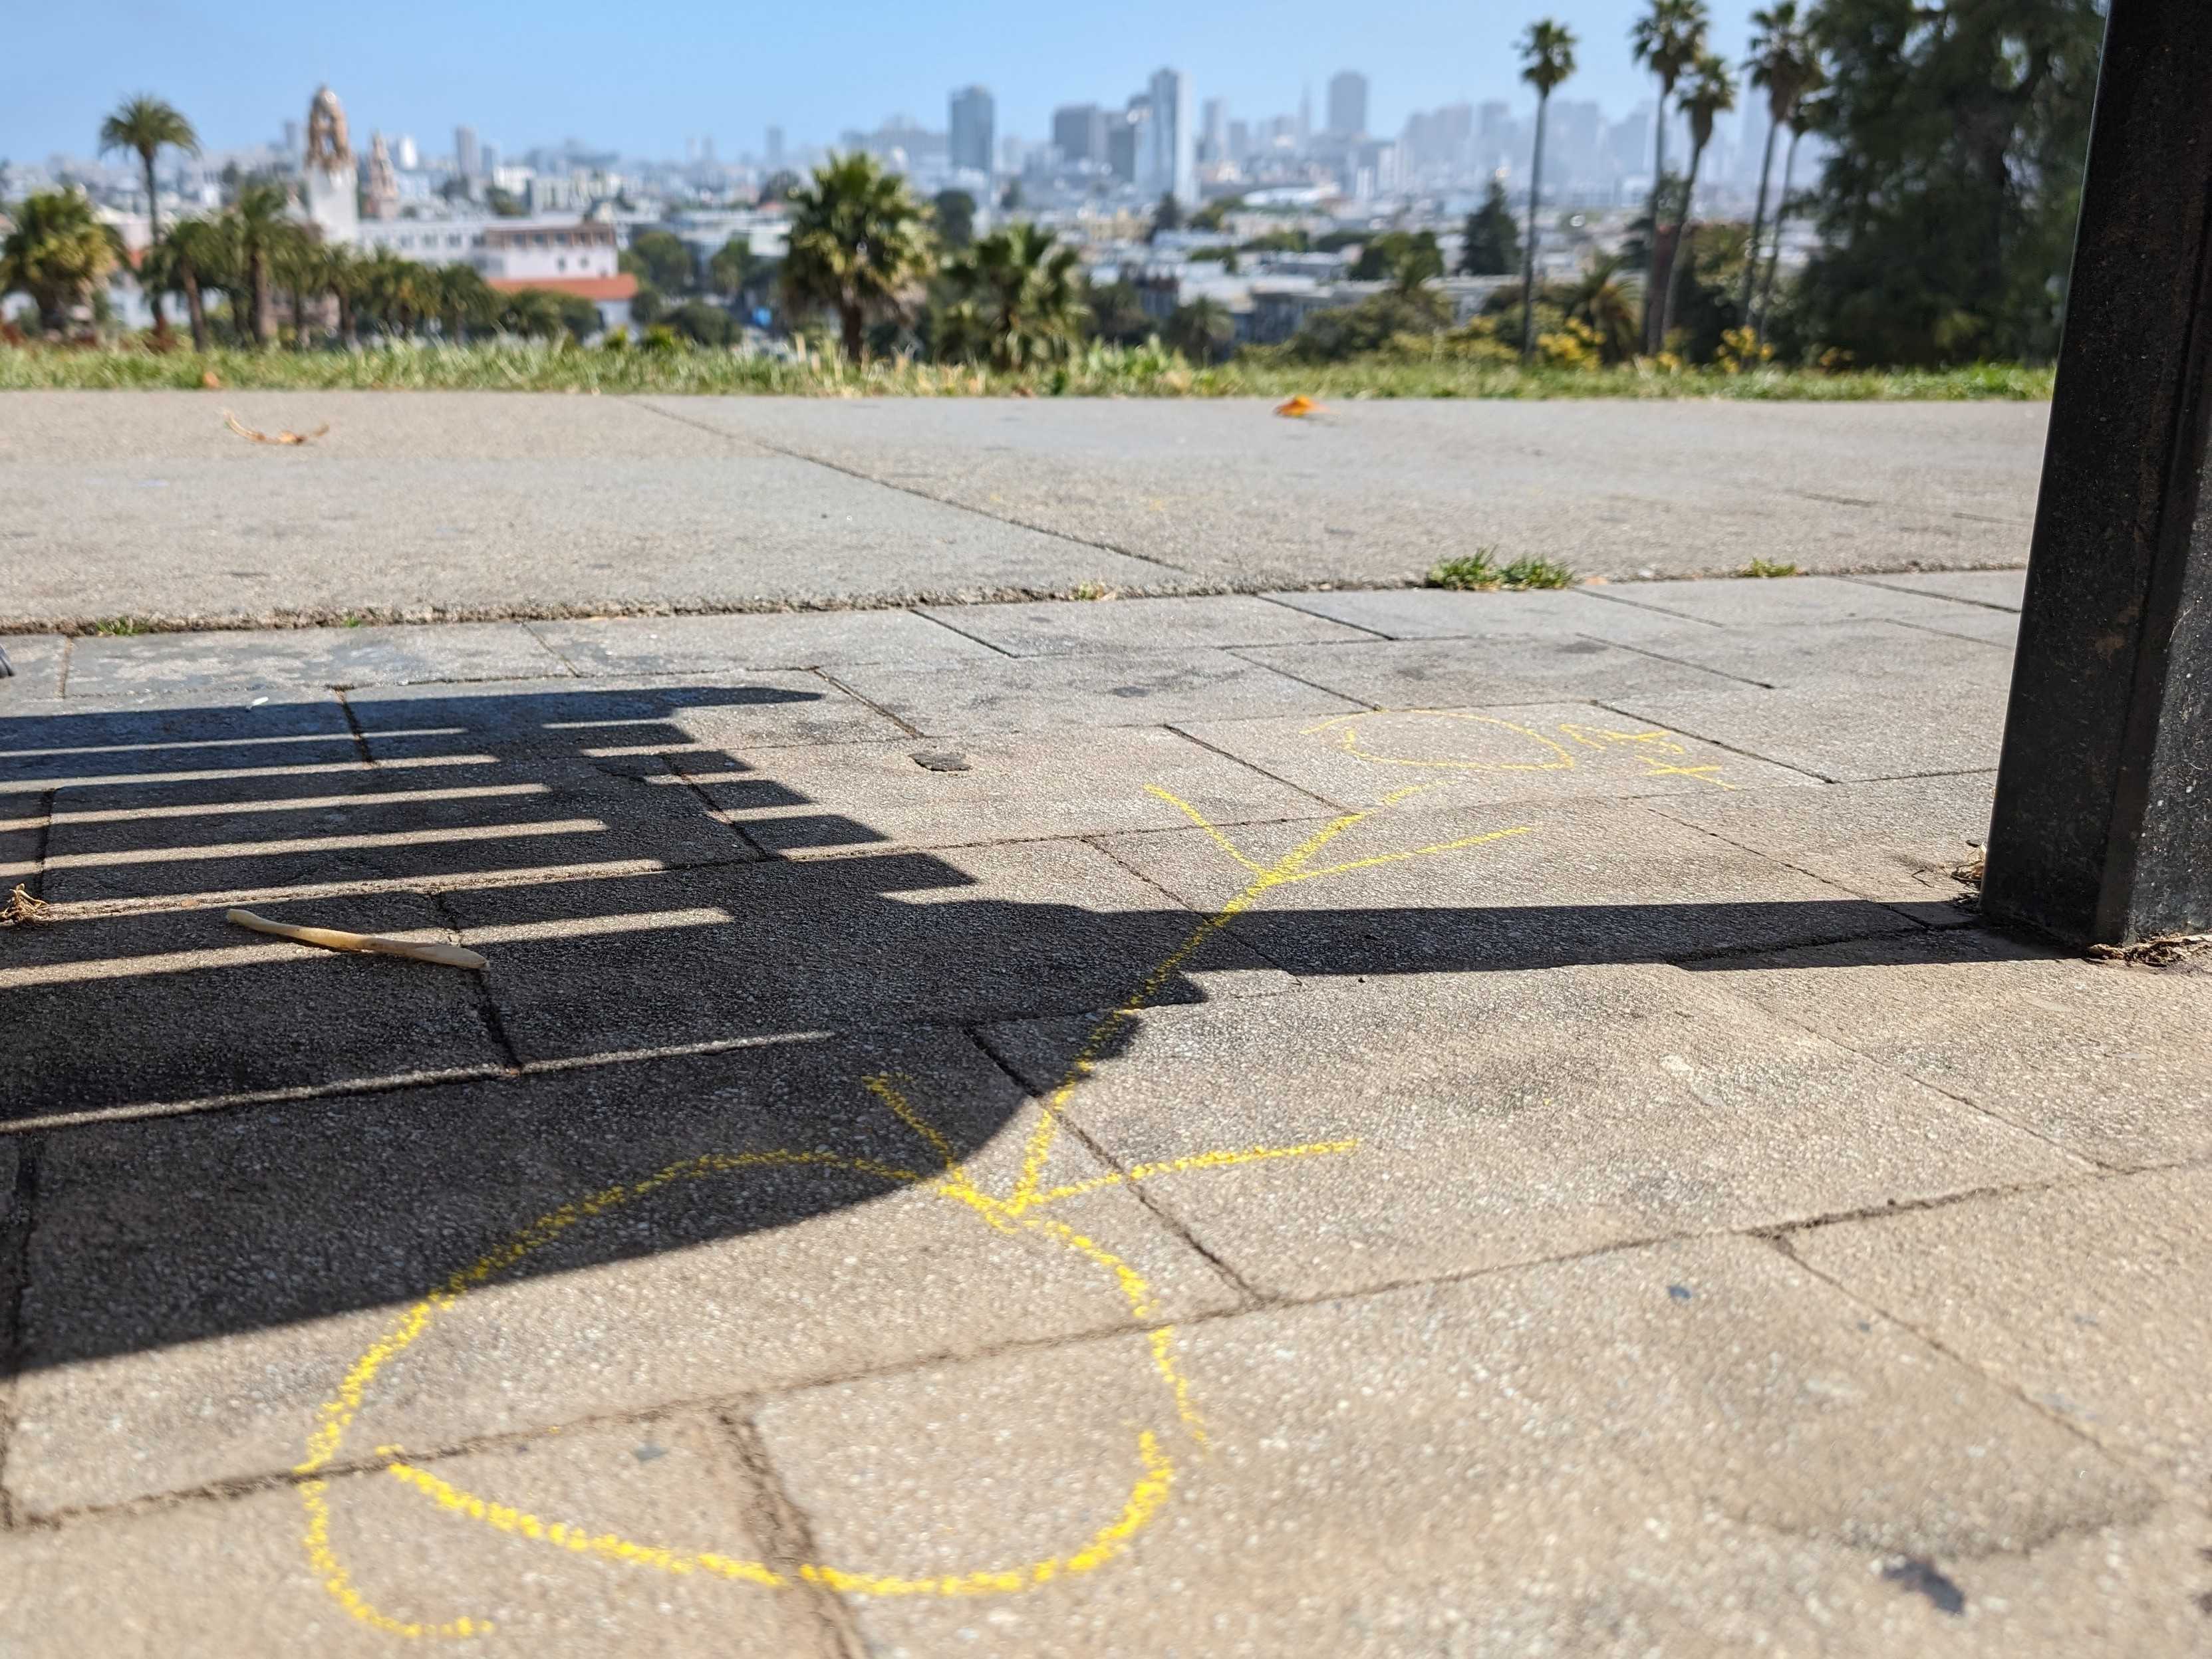 The image shows a city skyline from a park, with palm trees and a shadow on the ground. A yellow chalk drawing on the pavement says &quot;LOVE&quot; with a heart.